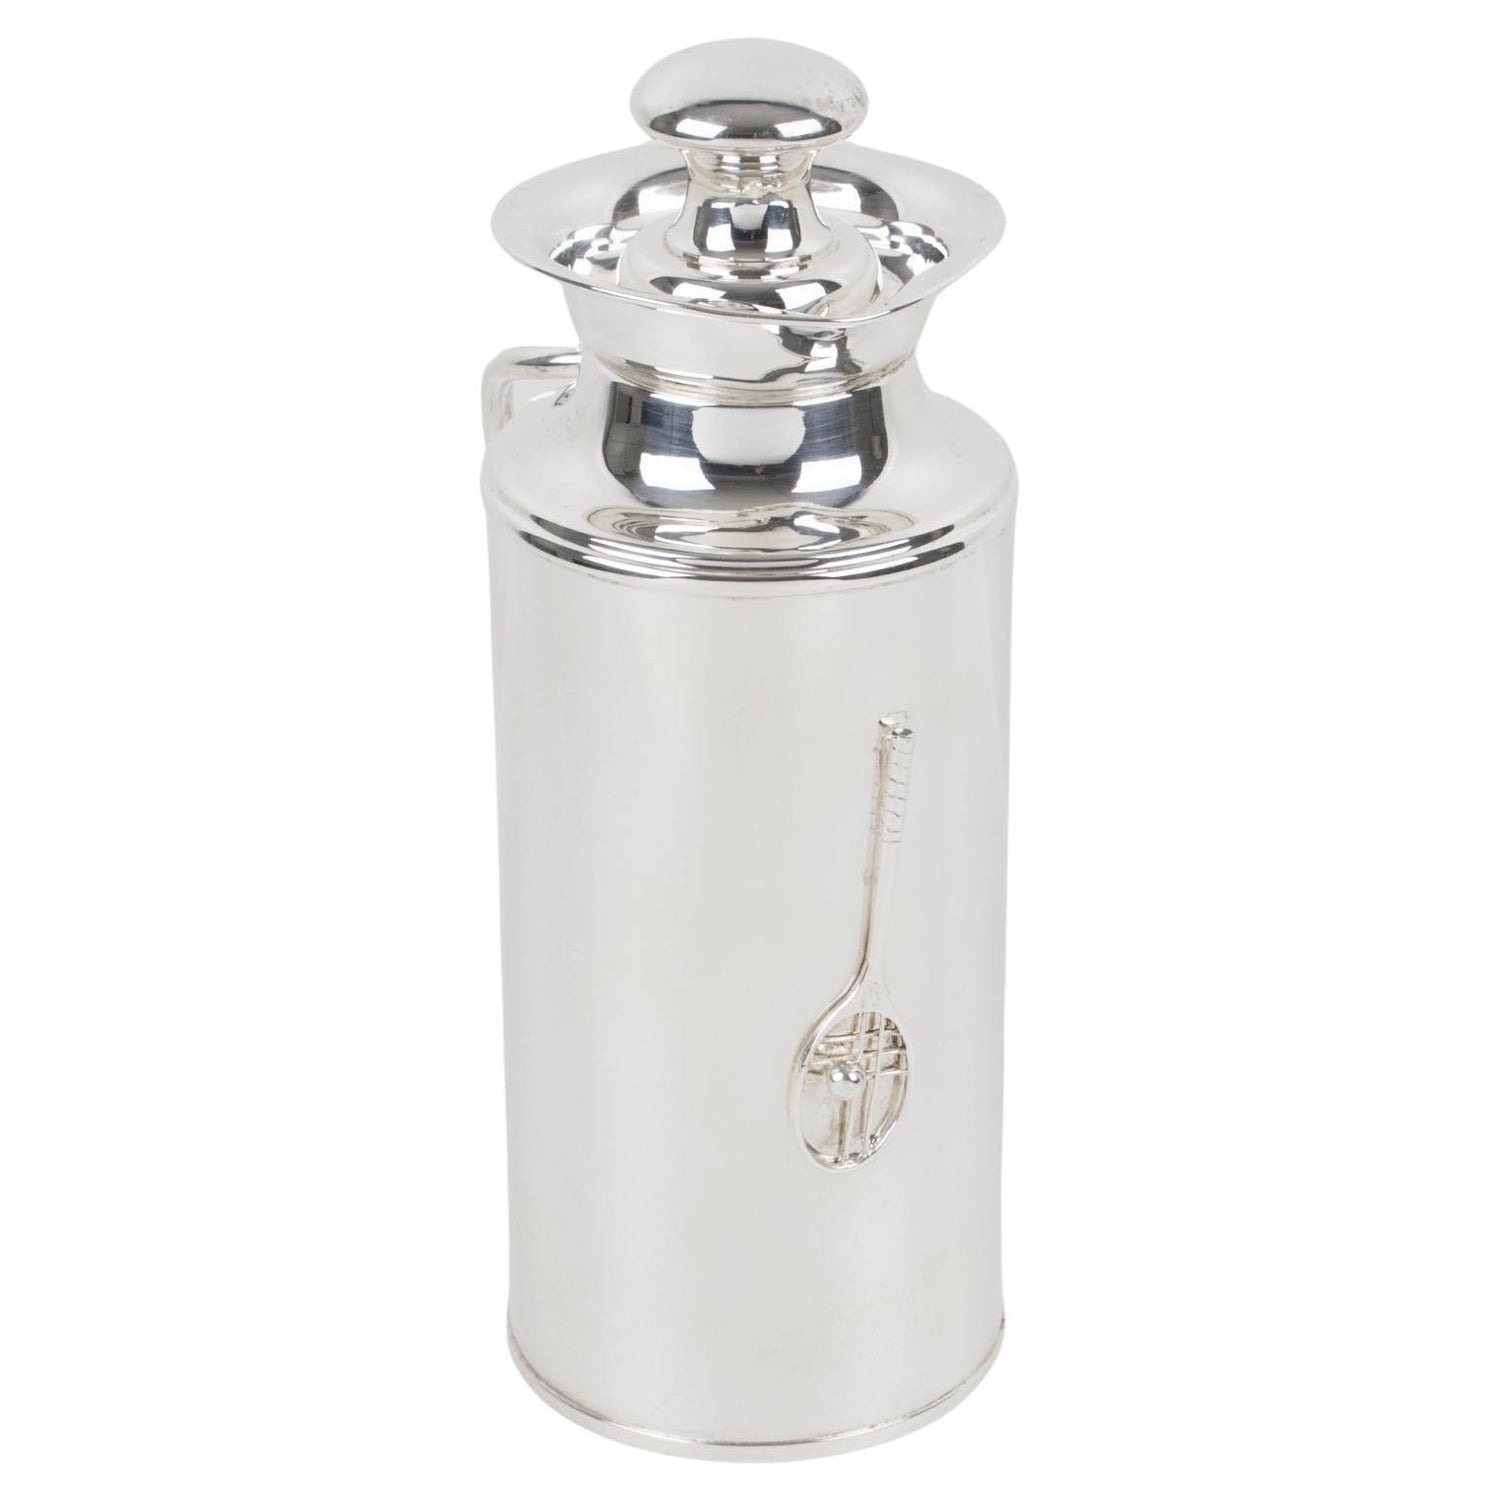 https://a.1stdibscdn.com/silver-plate-thermos-insulated-decanter-with-tennis-motif-italy-1980s-for-sale/f_16322/f_368356421701553191189/f_36835642_1701553191509_bg_processed.jpg?width=1500